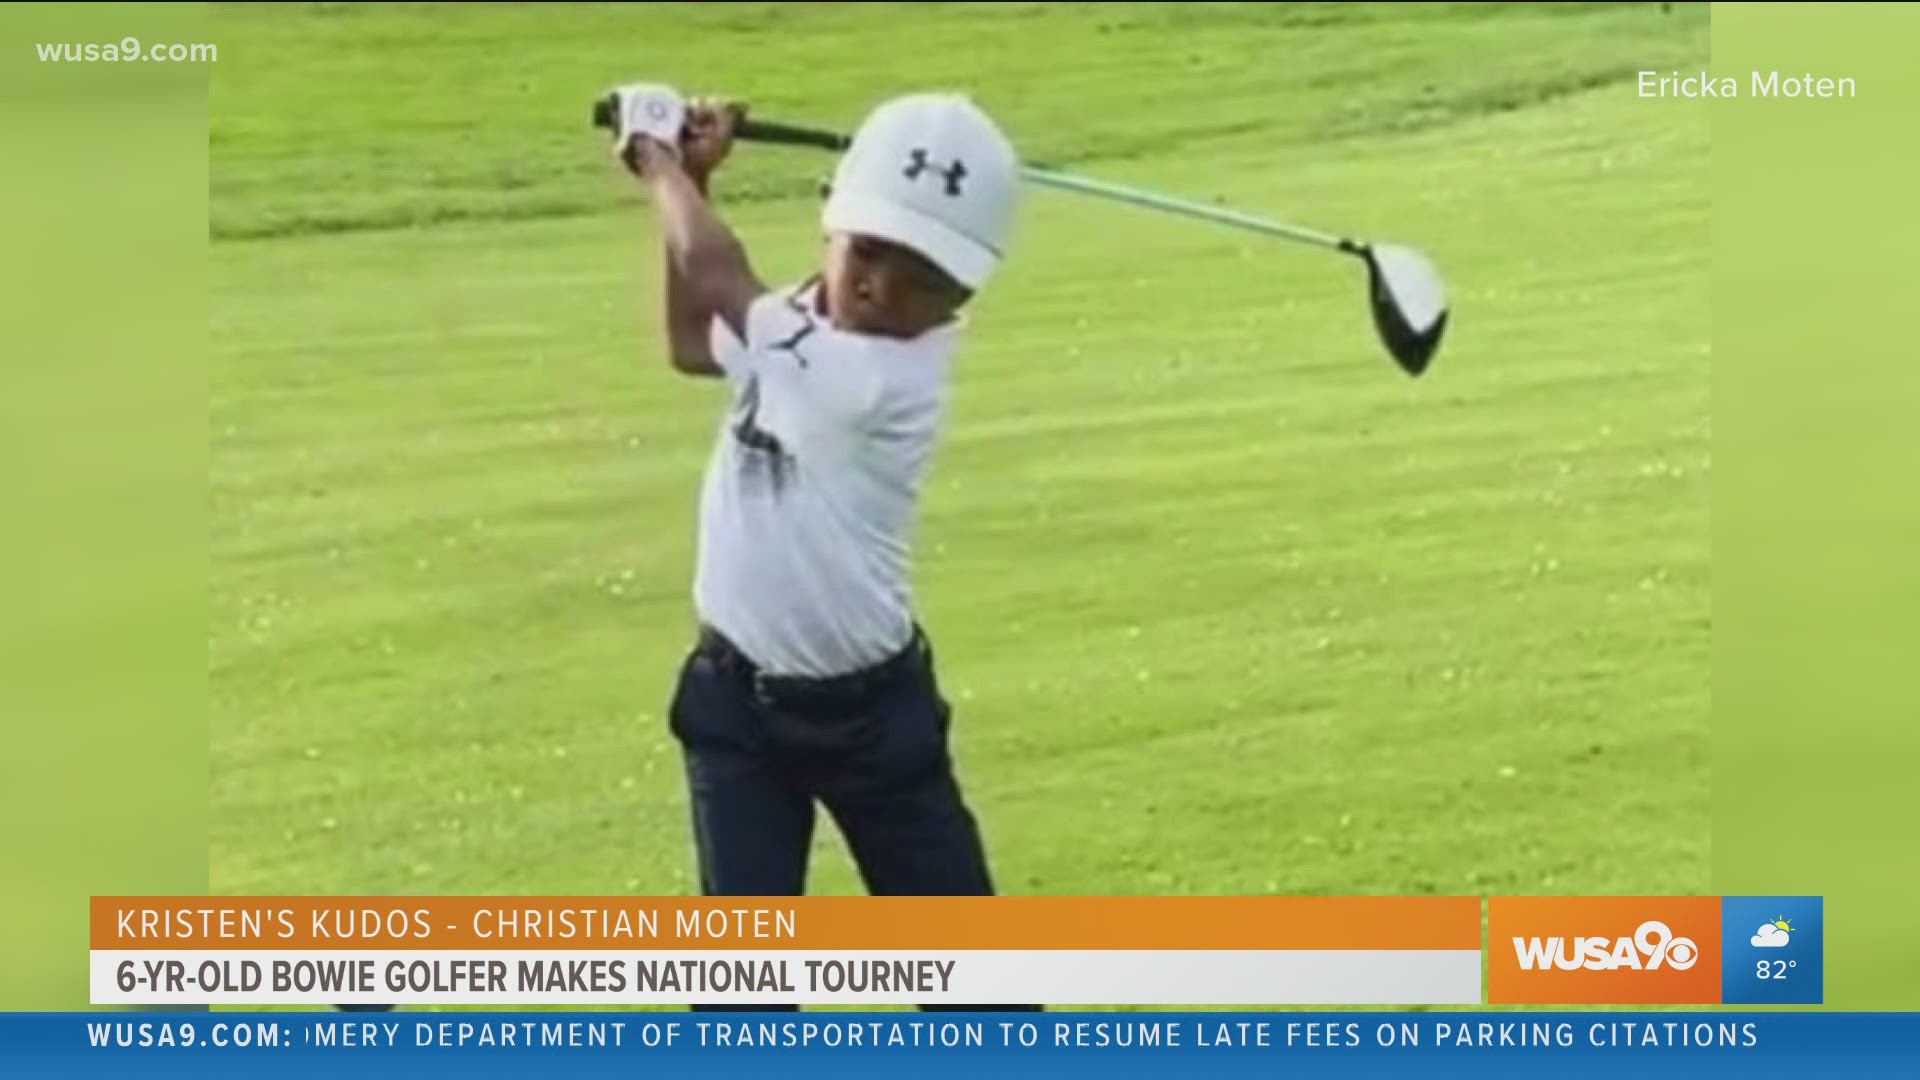 6-year-old Christian Moten is garnering attention on the golf course as he prepares for a national tournament. I Kristen's Kudos for July 14,2021